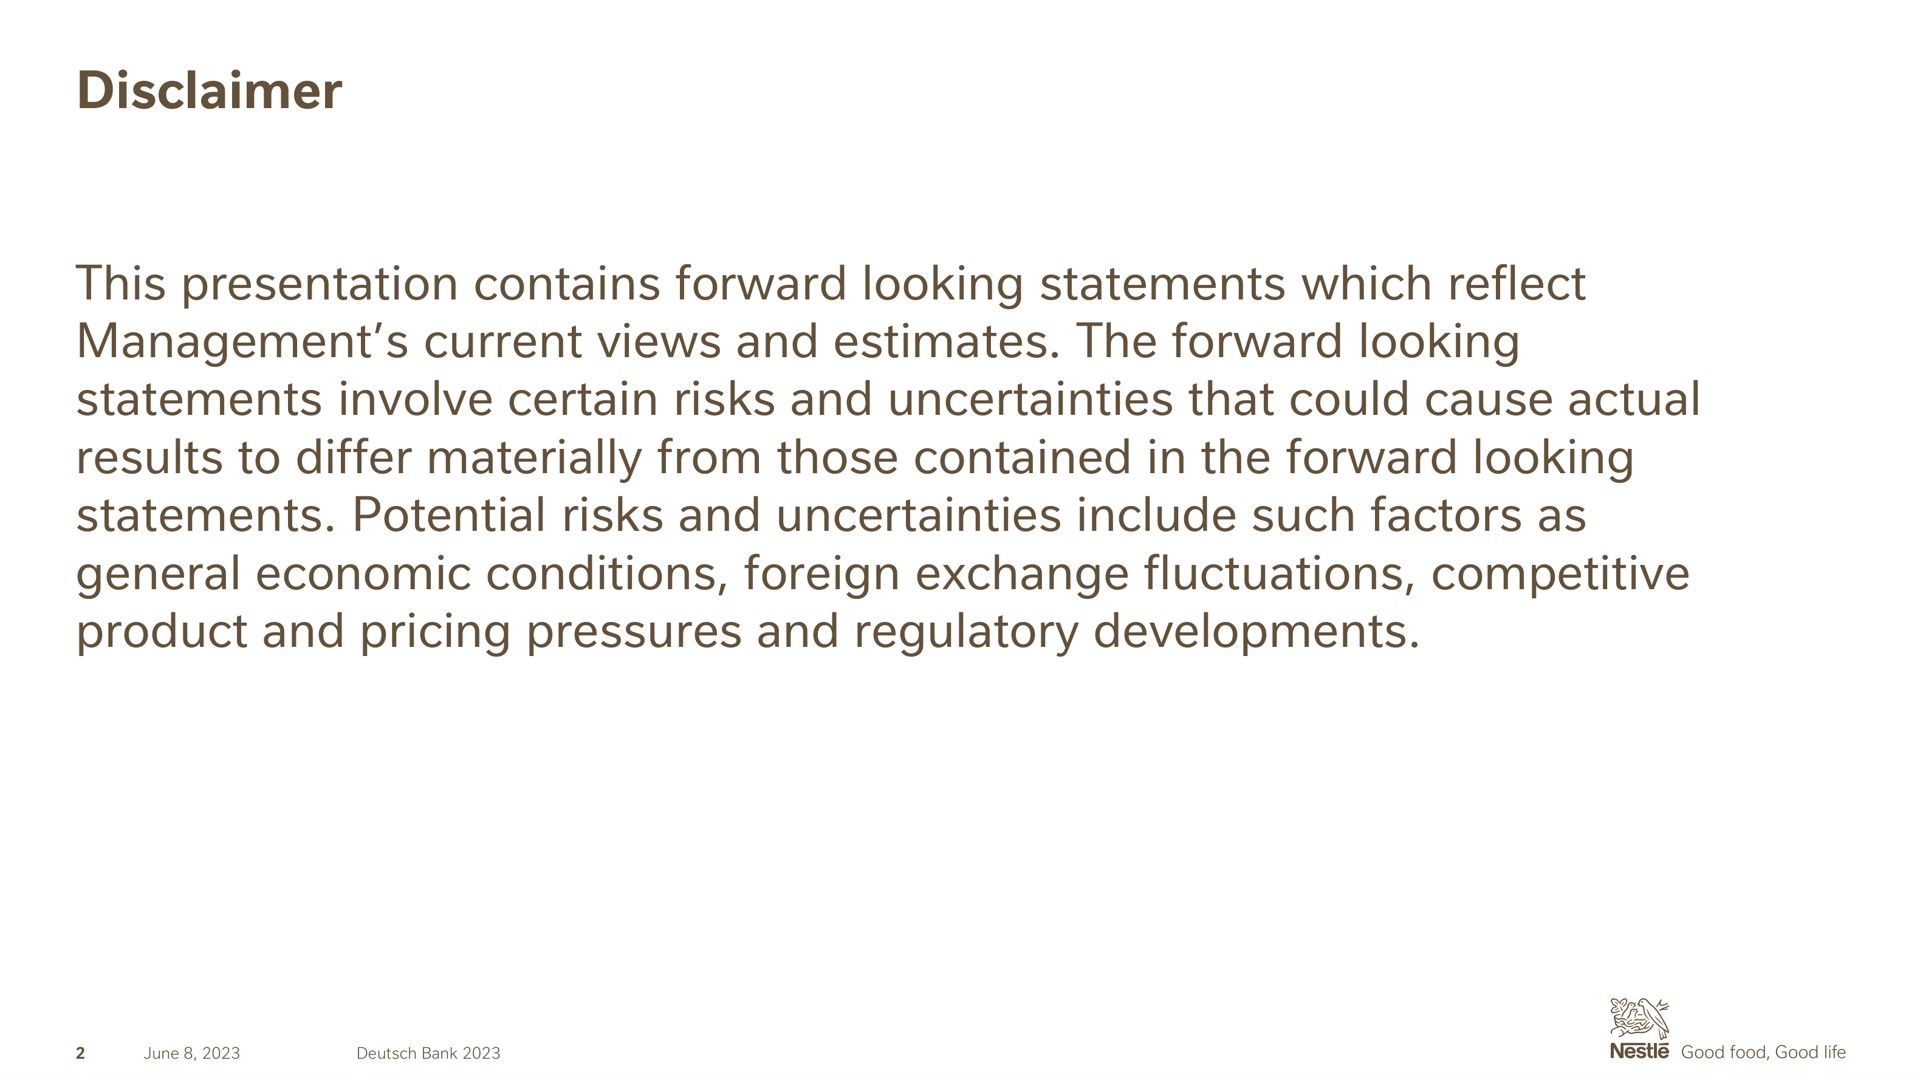 disclaimer this presentation contains forward looking statements which reflect management current views and estimates the forward looking statements involve certain risks and uncertainties that could cause actual results to differ materially from those contained in the forward looking statements potential risks and uncertainties include such factors as general economic conditions foreign exchange fluctuations competitive product and pricing pressures and regulatory developments | Nestle